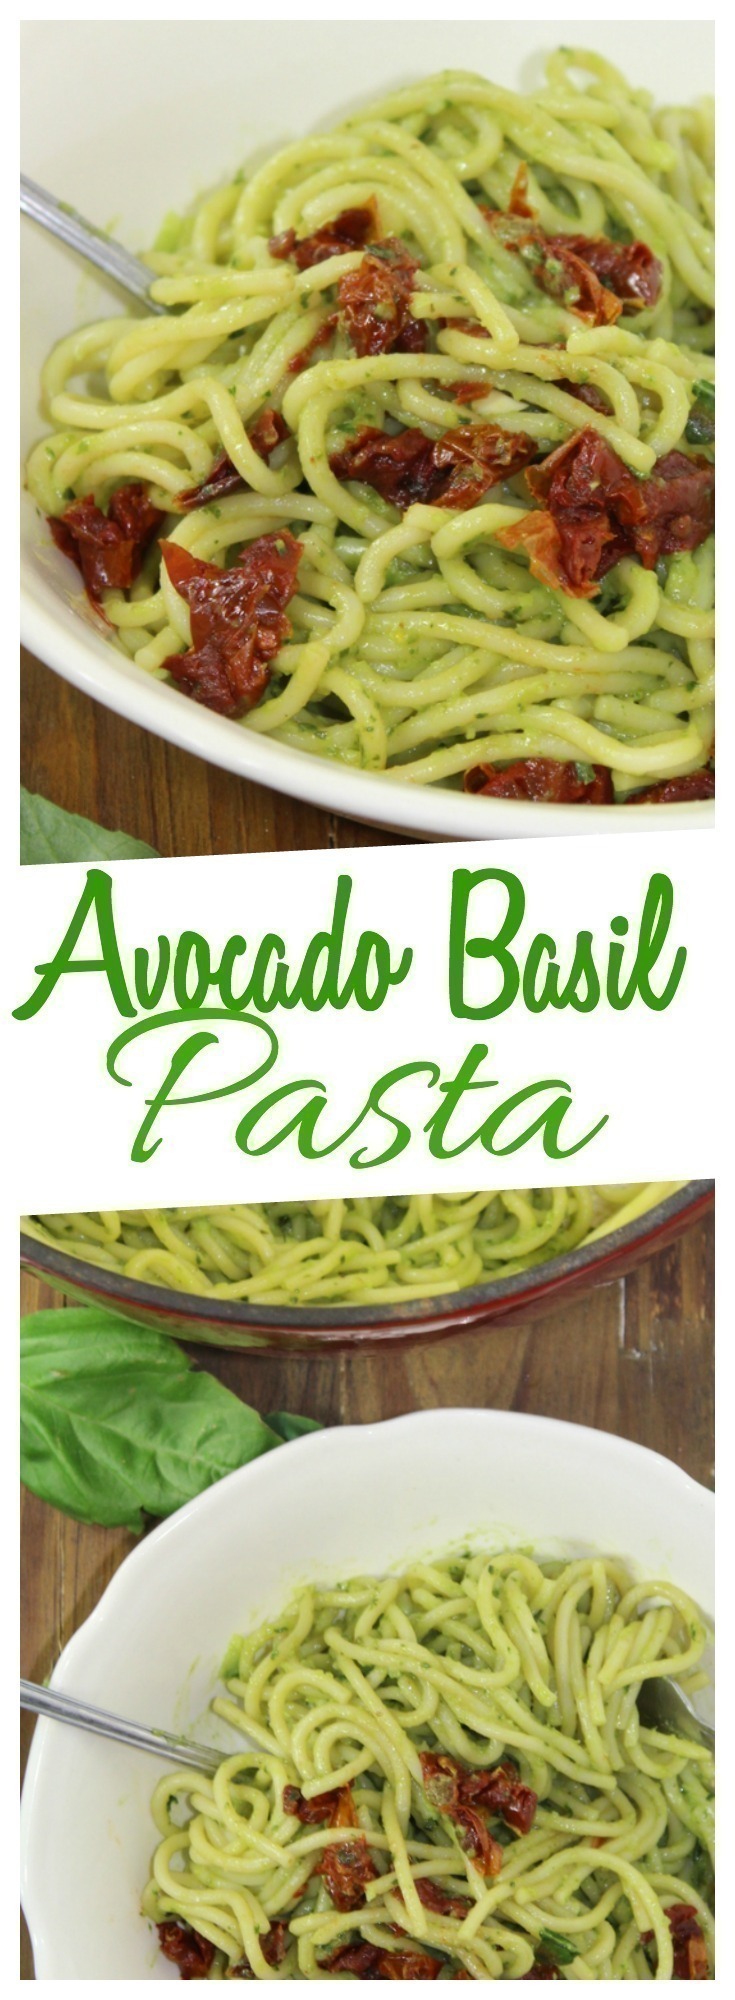 This creamy avocado basil pasta is not only rich in flavor it's incredibly healthy - have it on your dinner table in less than 20 minutes!